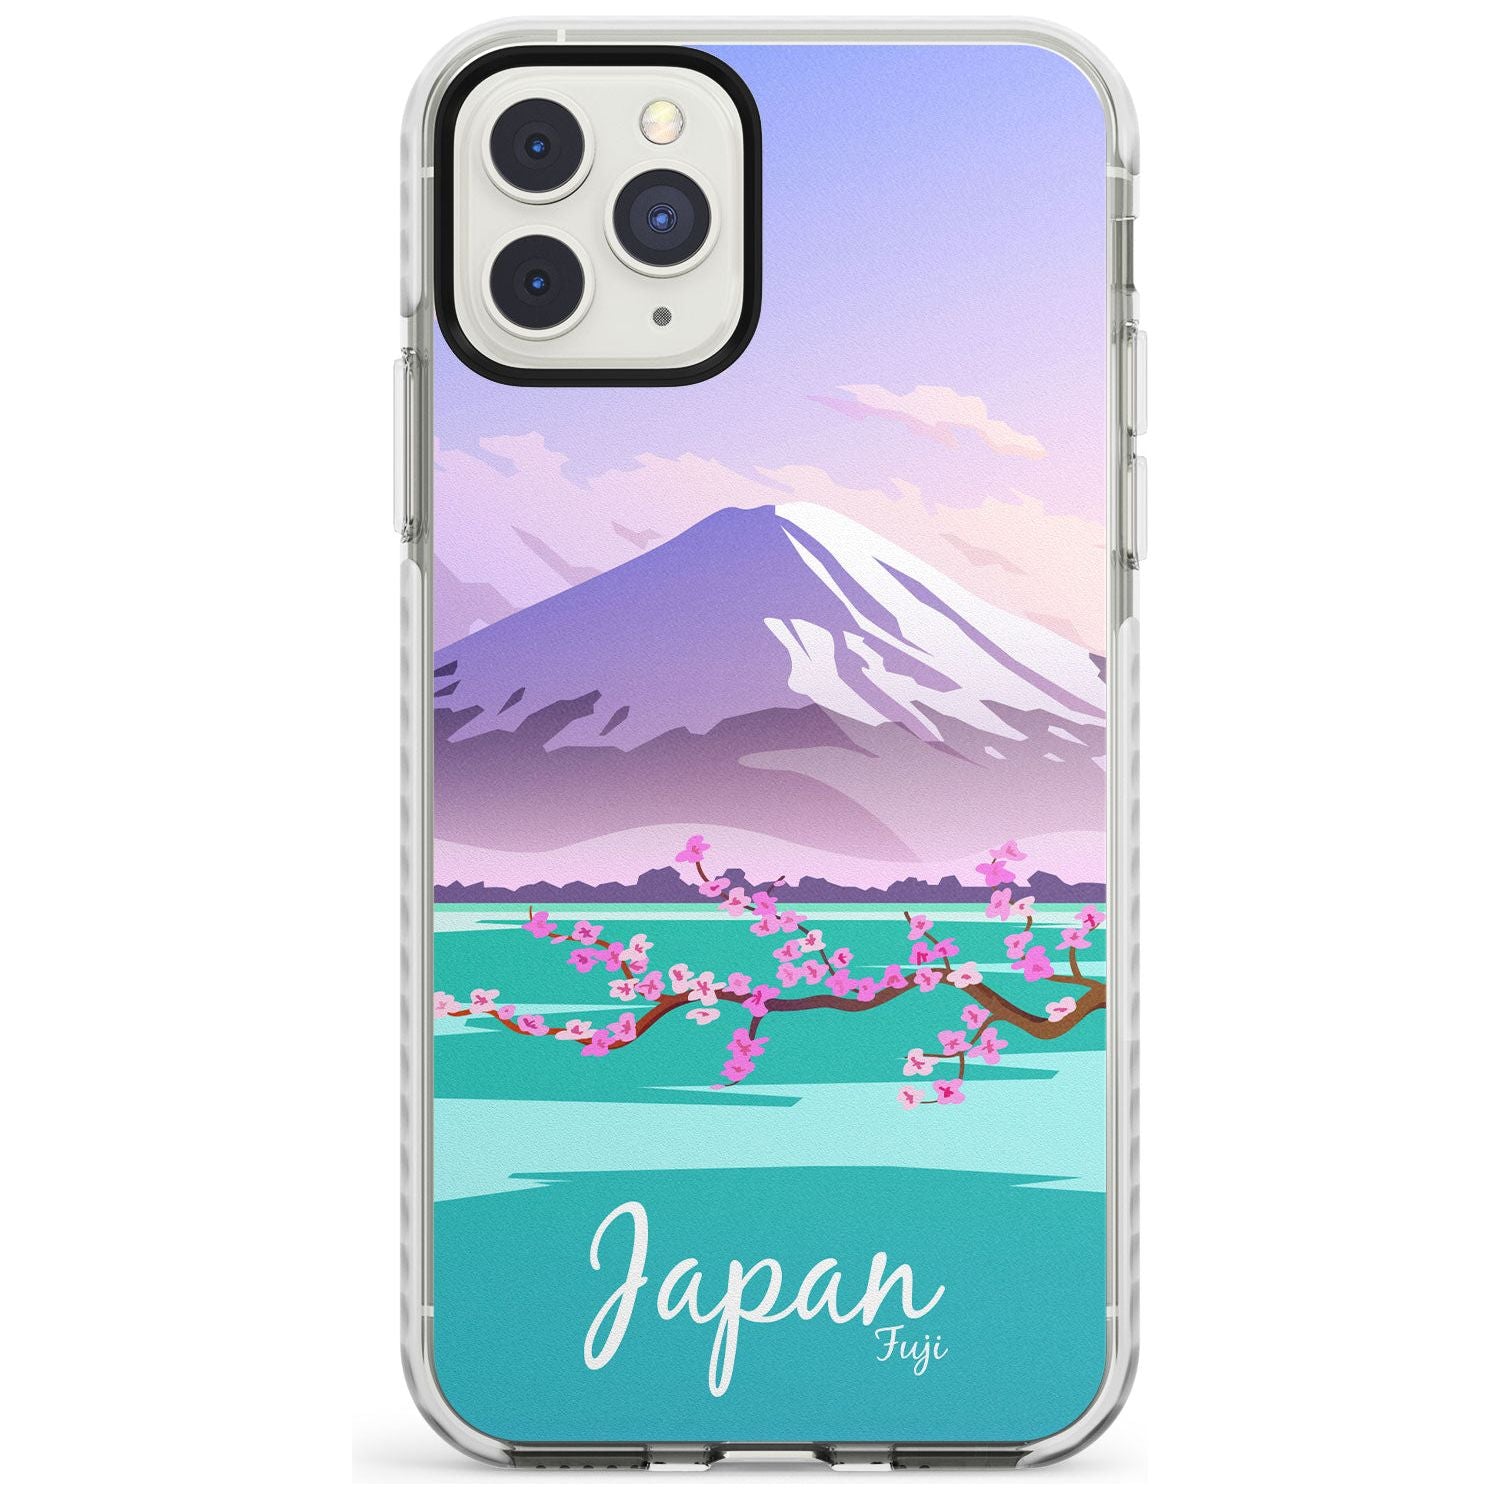 Vintage Travel Poster Japan Impact Phone Case for iPhone 11 Pro Max